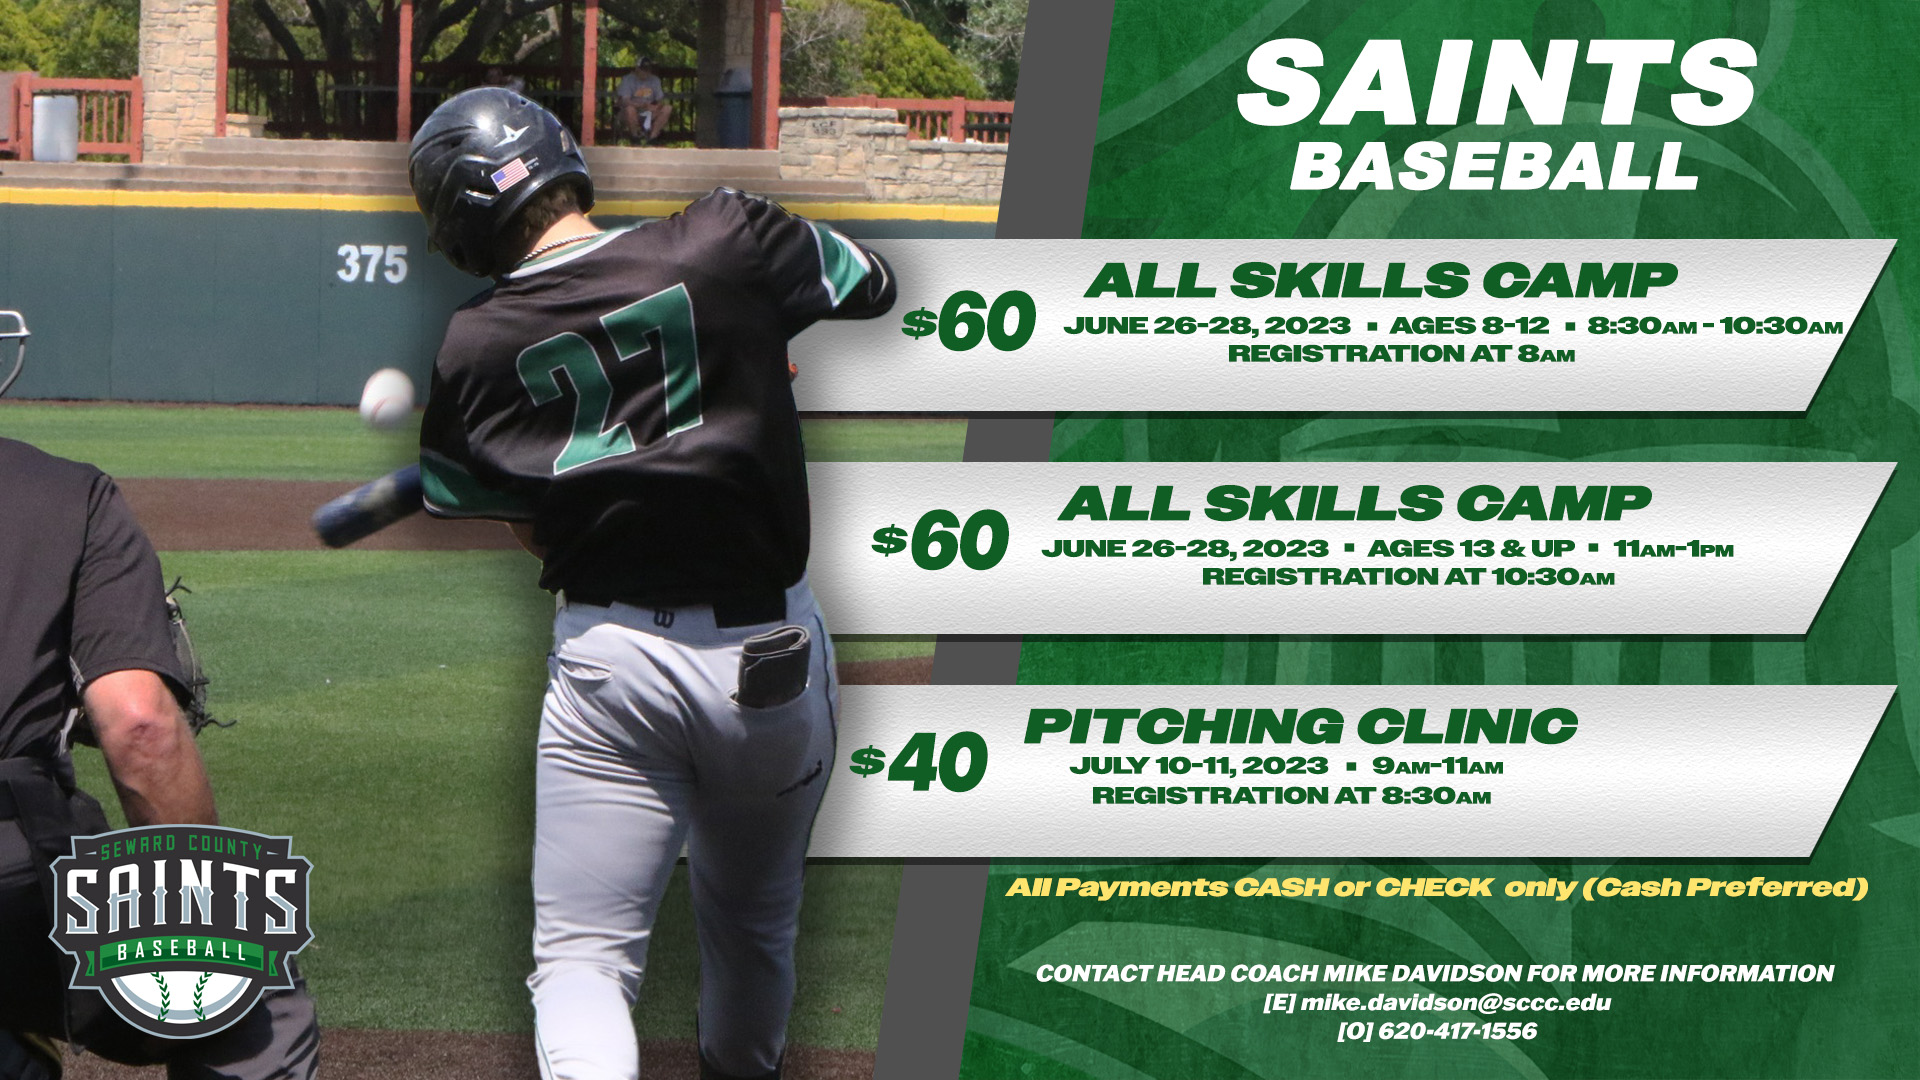 Saints Baseball will Hold Multiple Camps